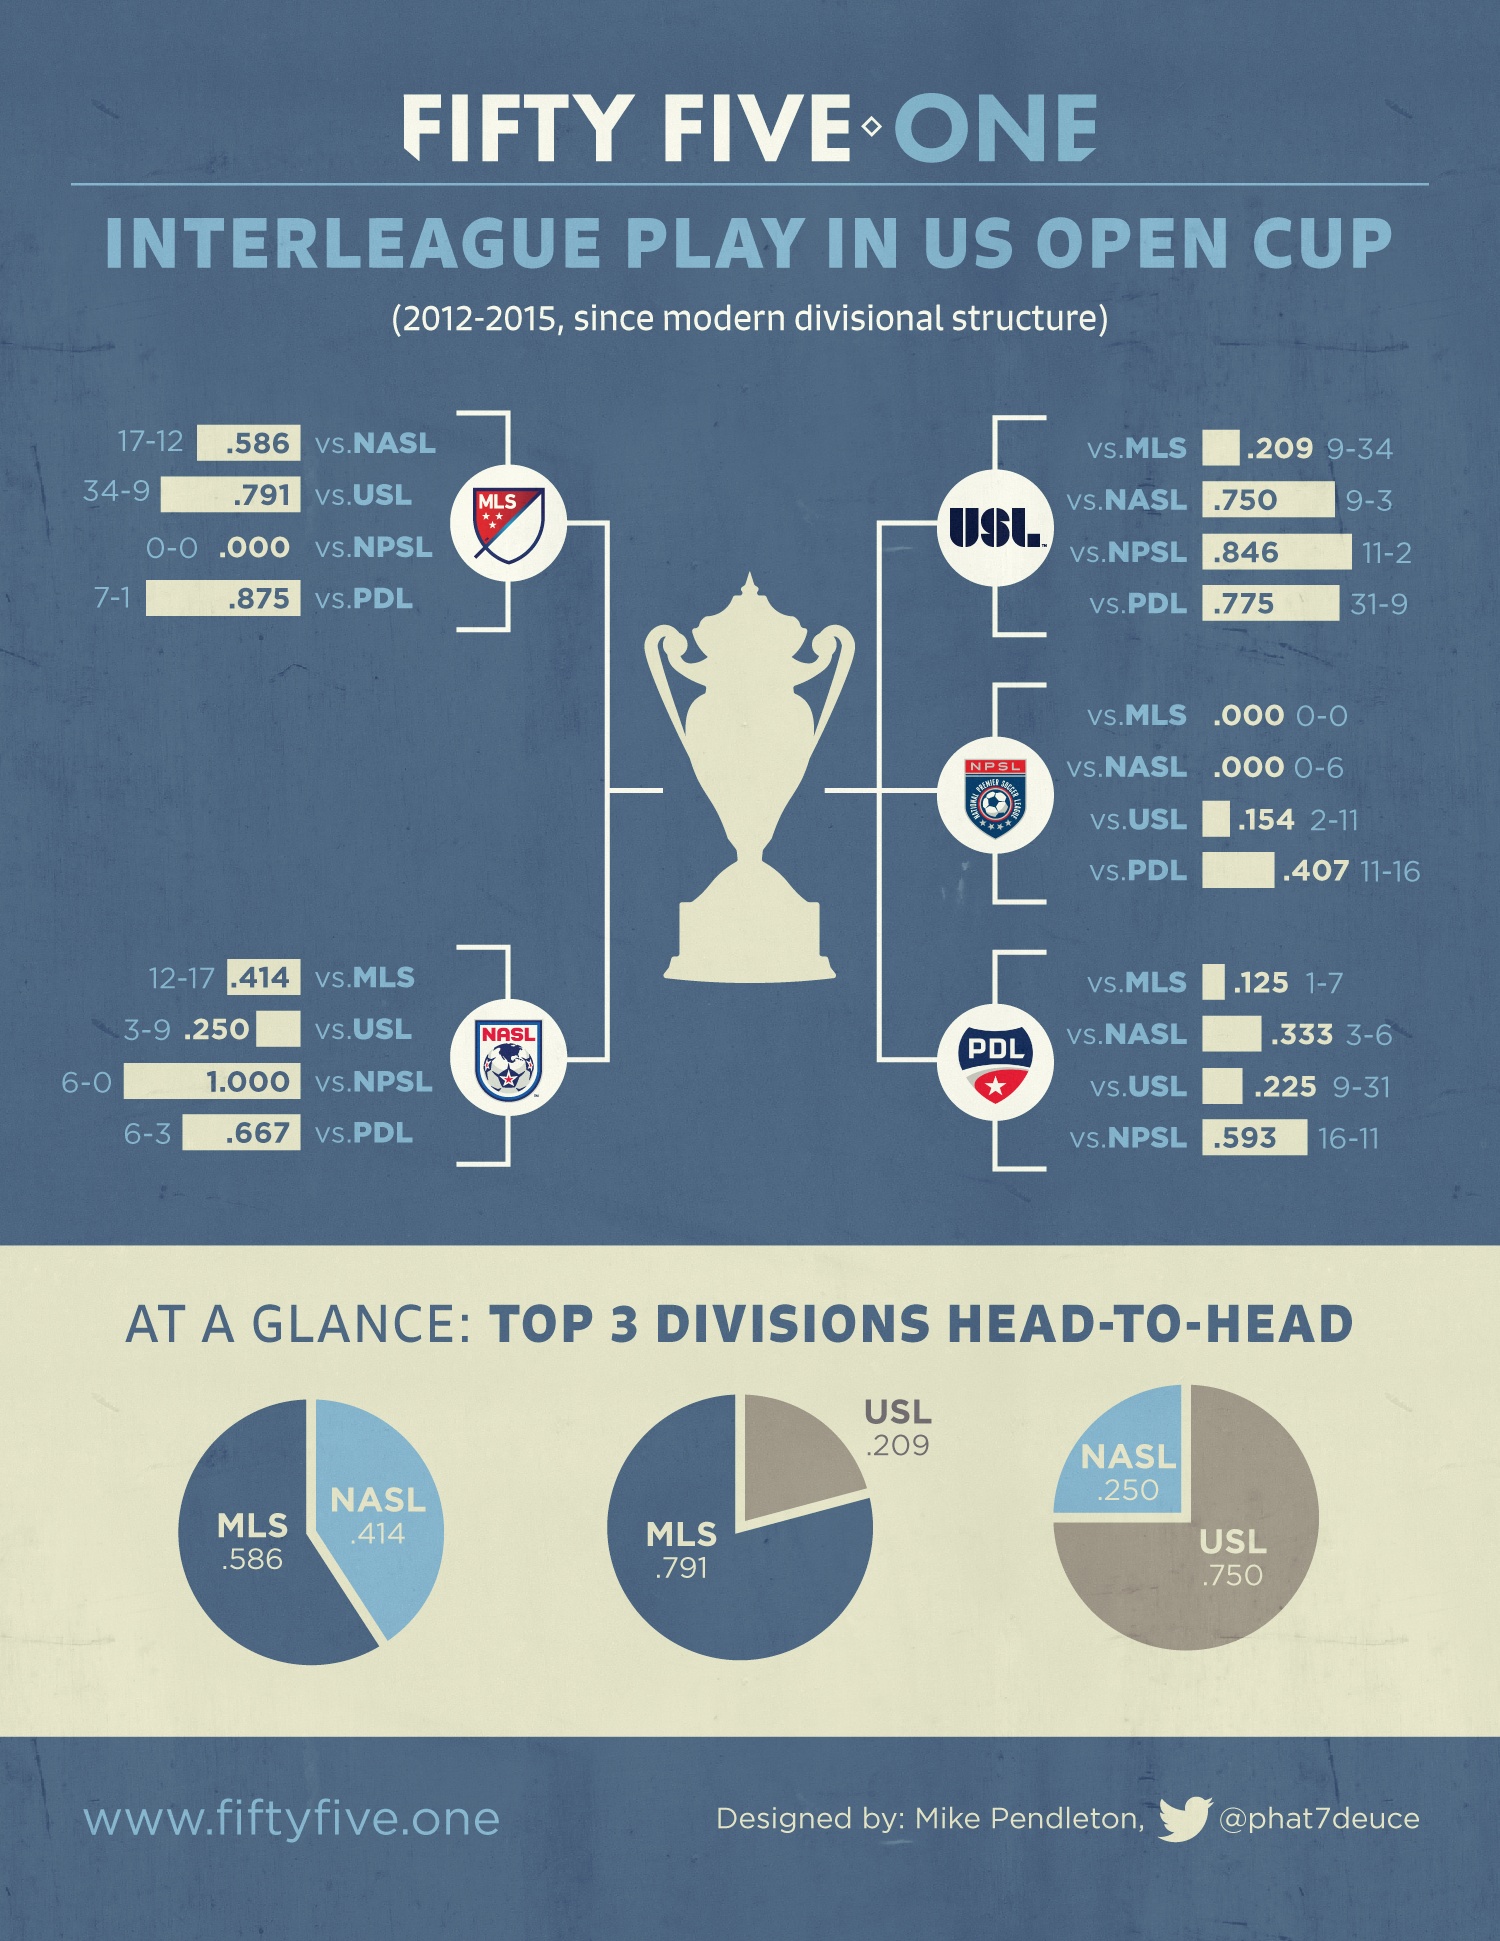 Infographic: Interleague Play in US Open Cup